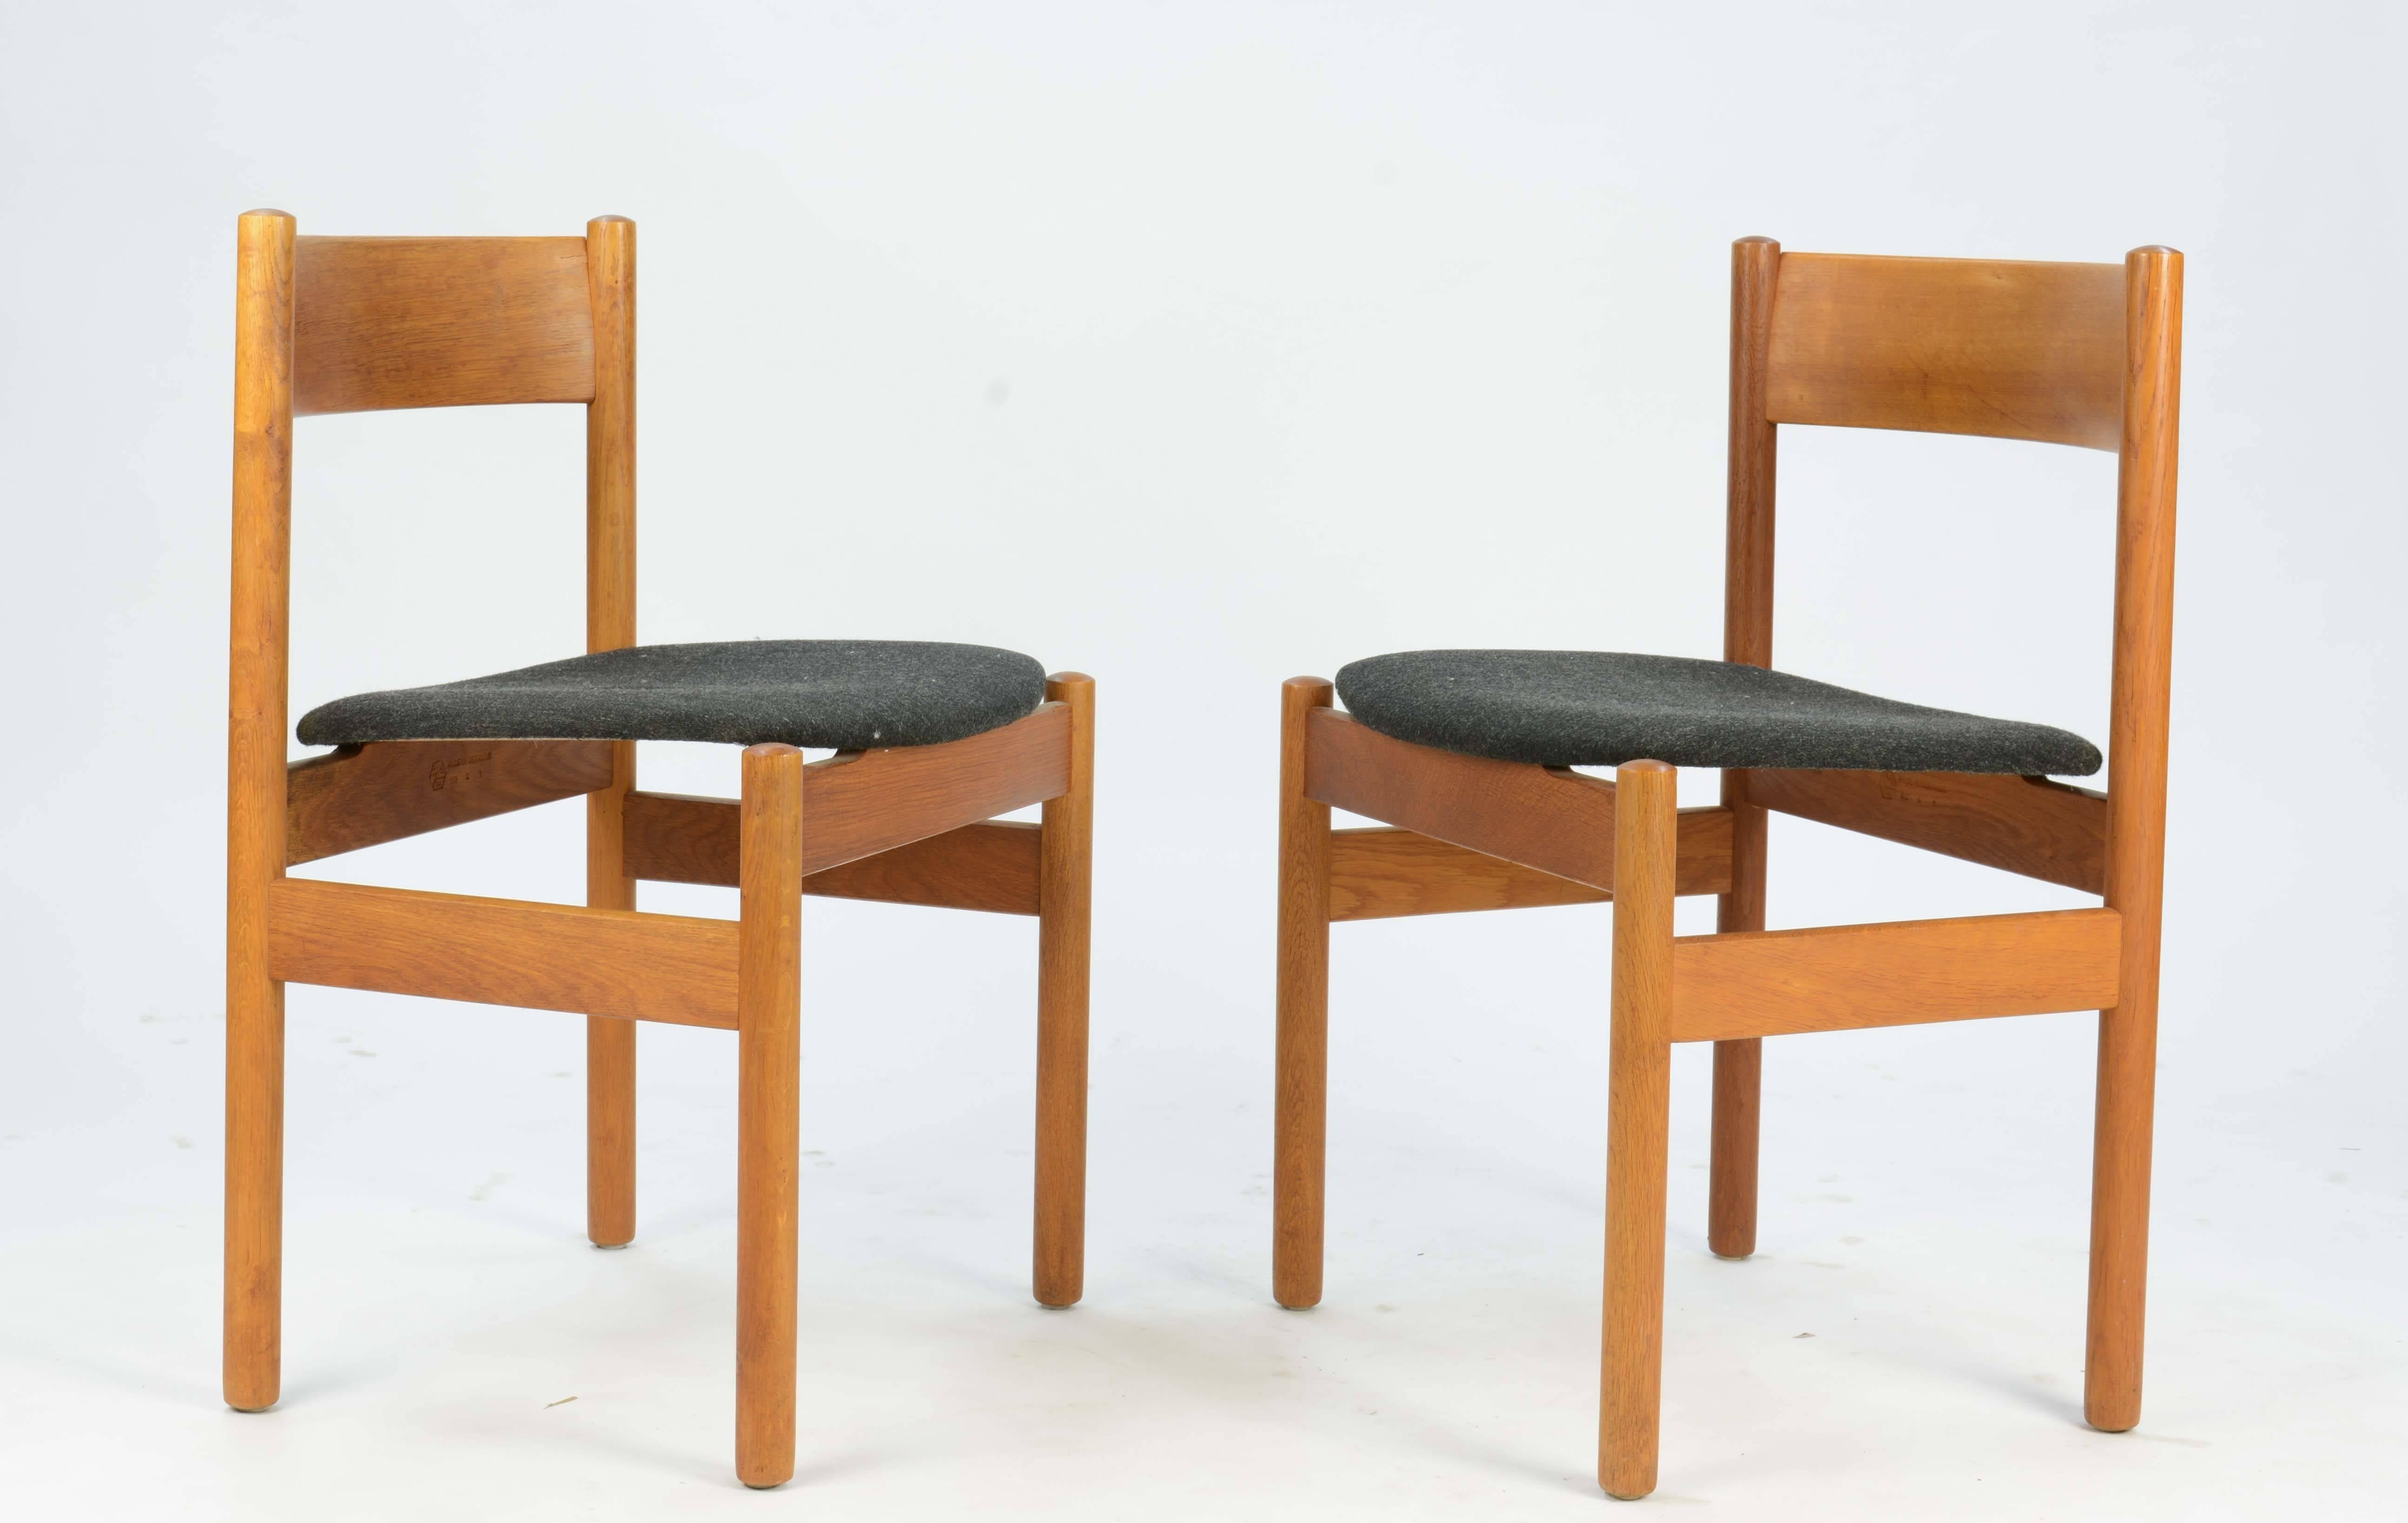 A set of four FDB Mobler of Denmark dining chairs that appear to have floating seat and sculpted contoured back in teak and oak. The chairs are labelled with the early FDB brand.